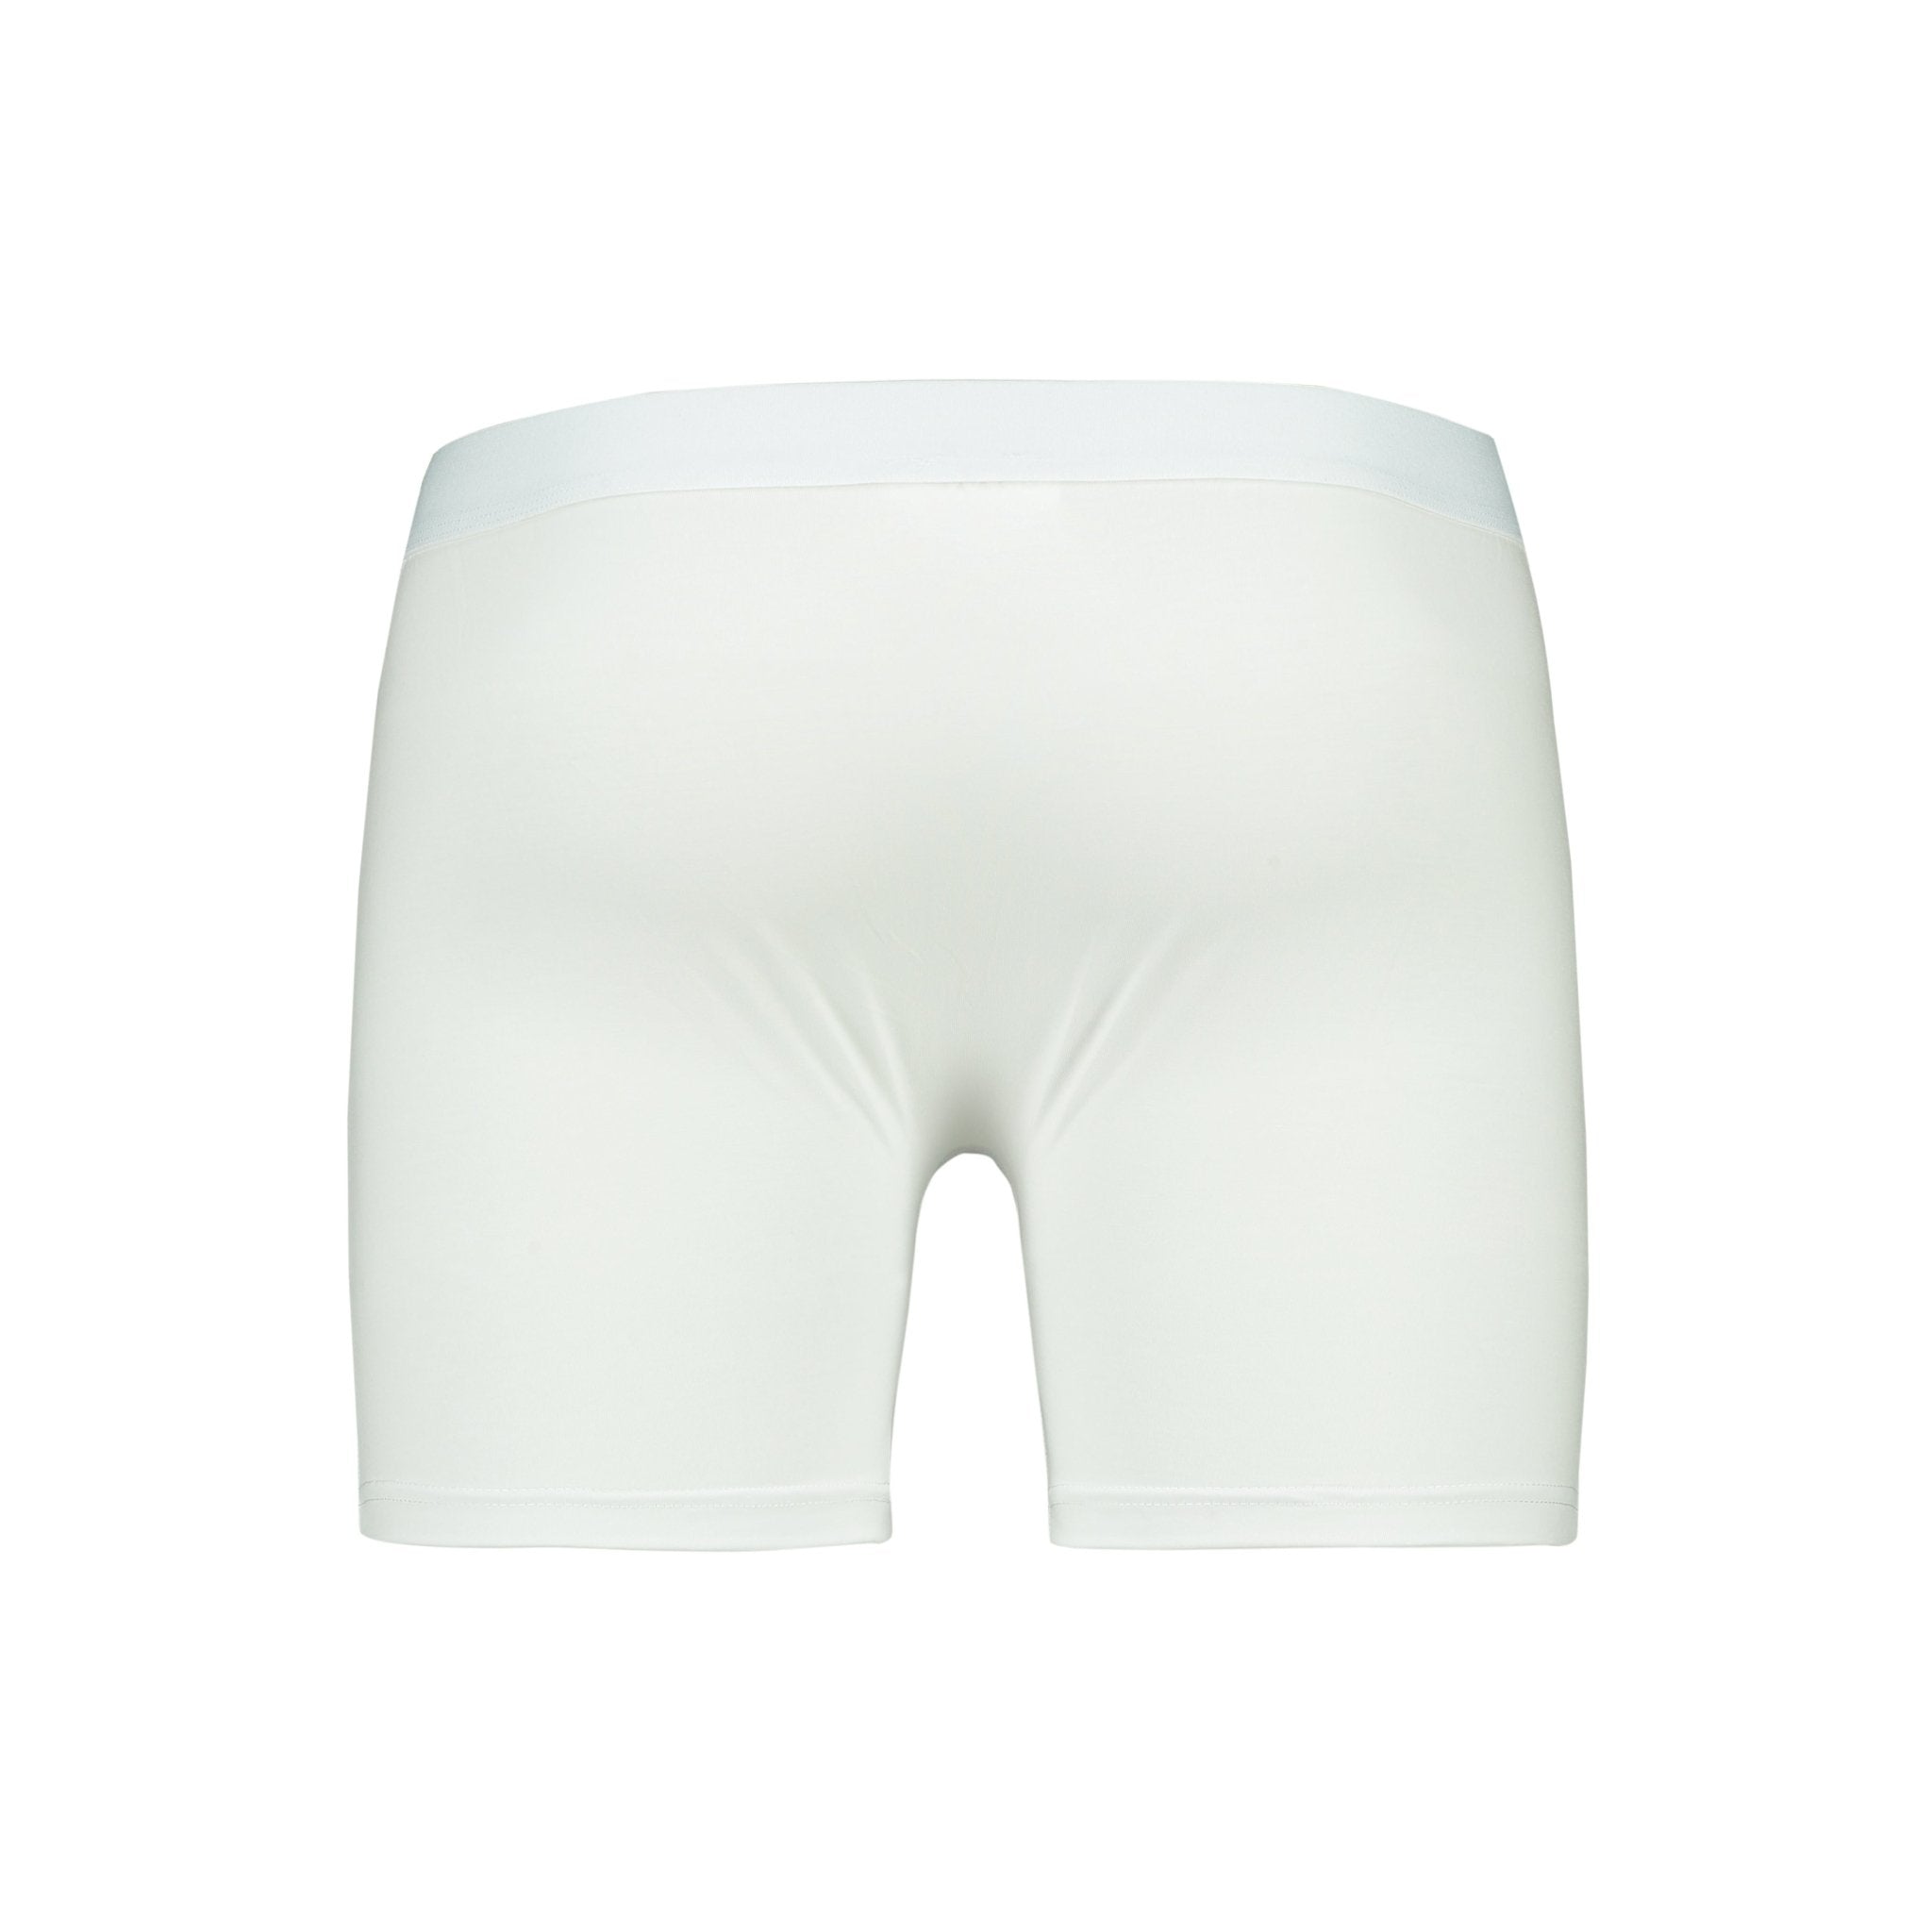 White All-in-One Packing Boxers